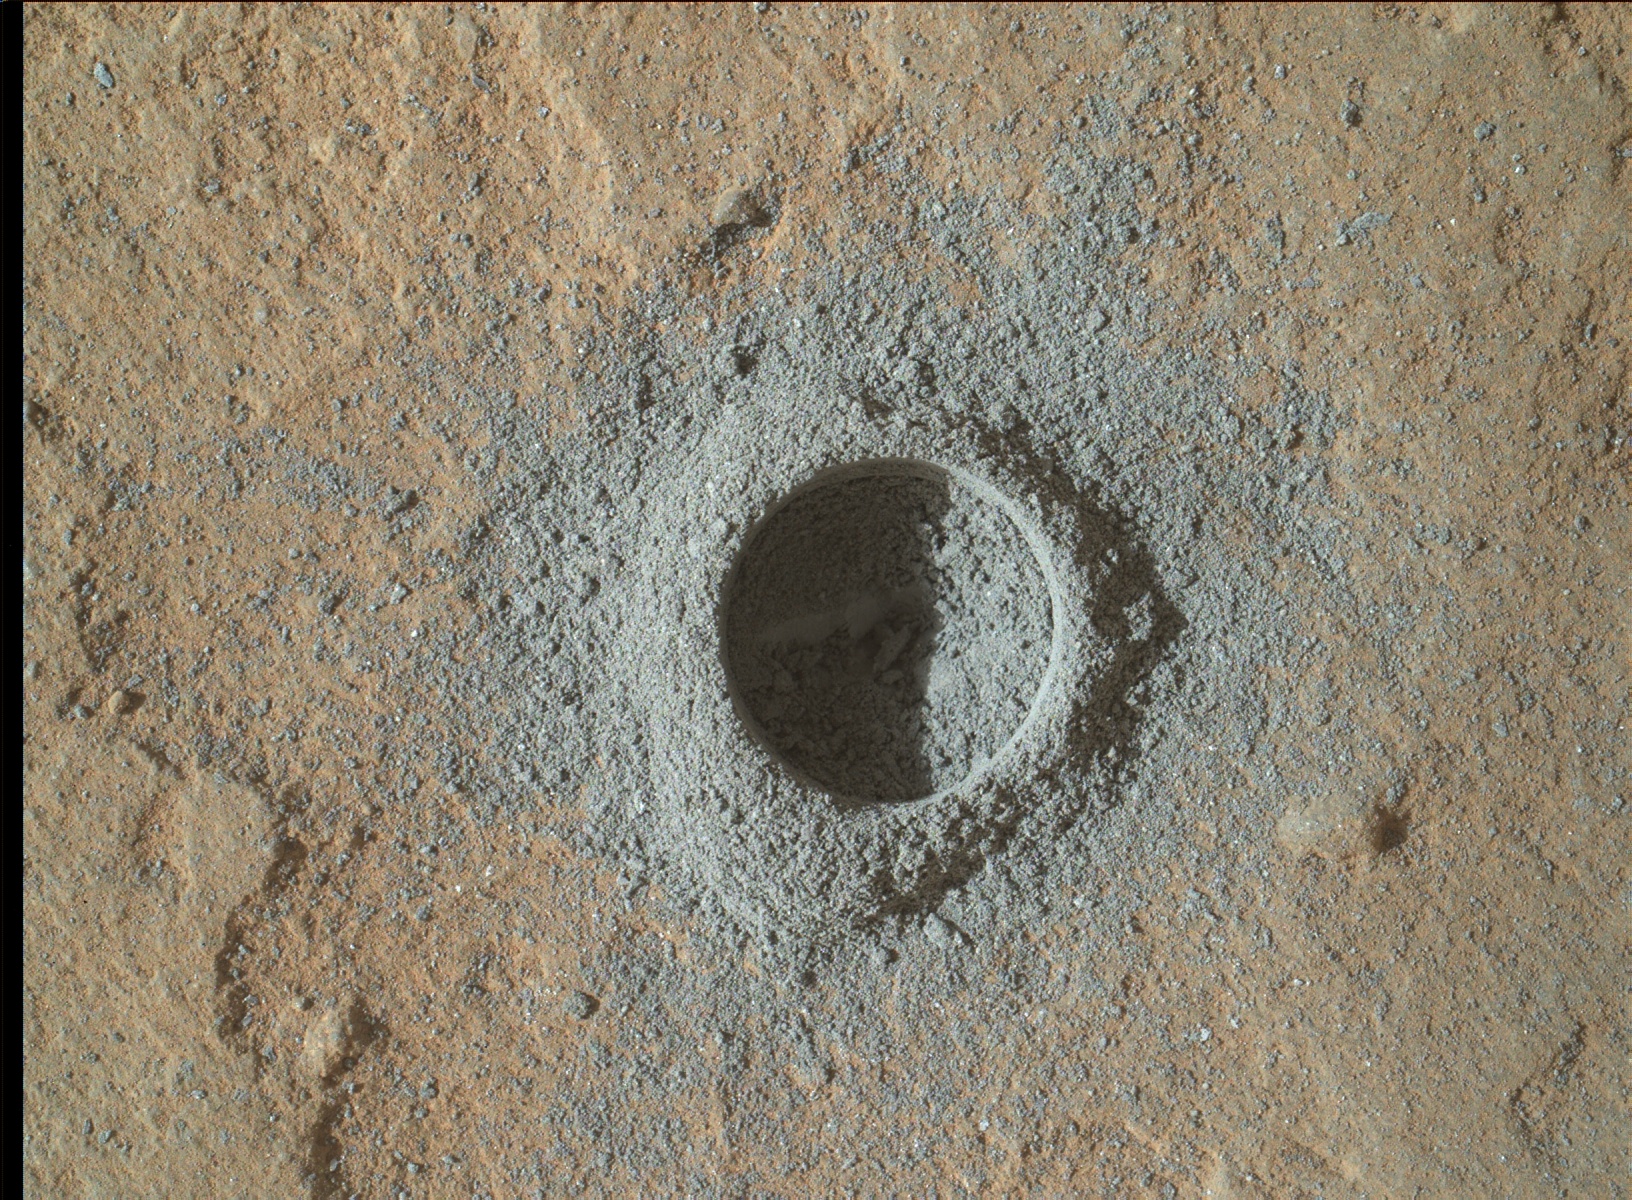 Nasa's Mars rover Curiosity acquired this image using its Mars Hand Lens Imager (MAHLI) on Sol 1116